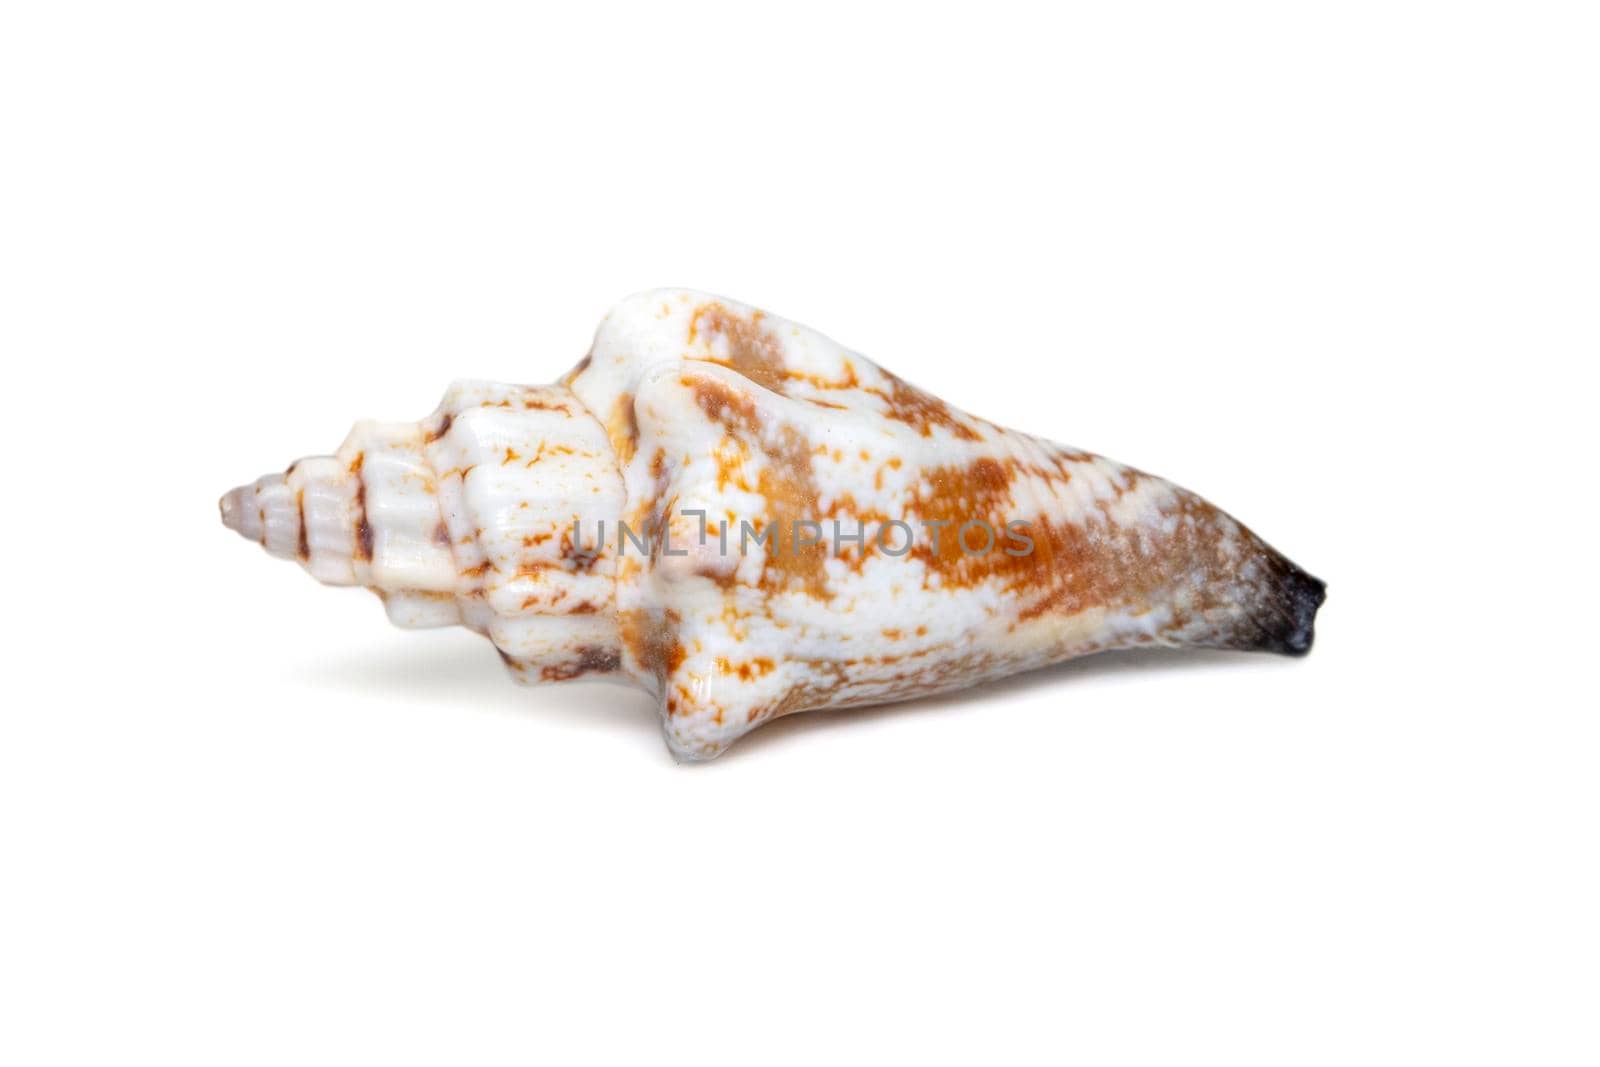 Image of canarium urceus is a species of sea snail, a marine gastropod mollusk in the family strombidae, the true conchs on a white background. Red Sea Snail. Undersea Animals. Sea Shells. by yod67